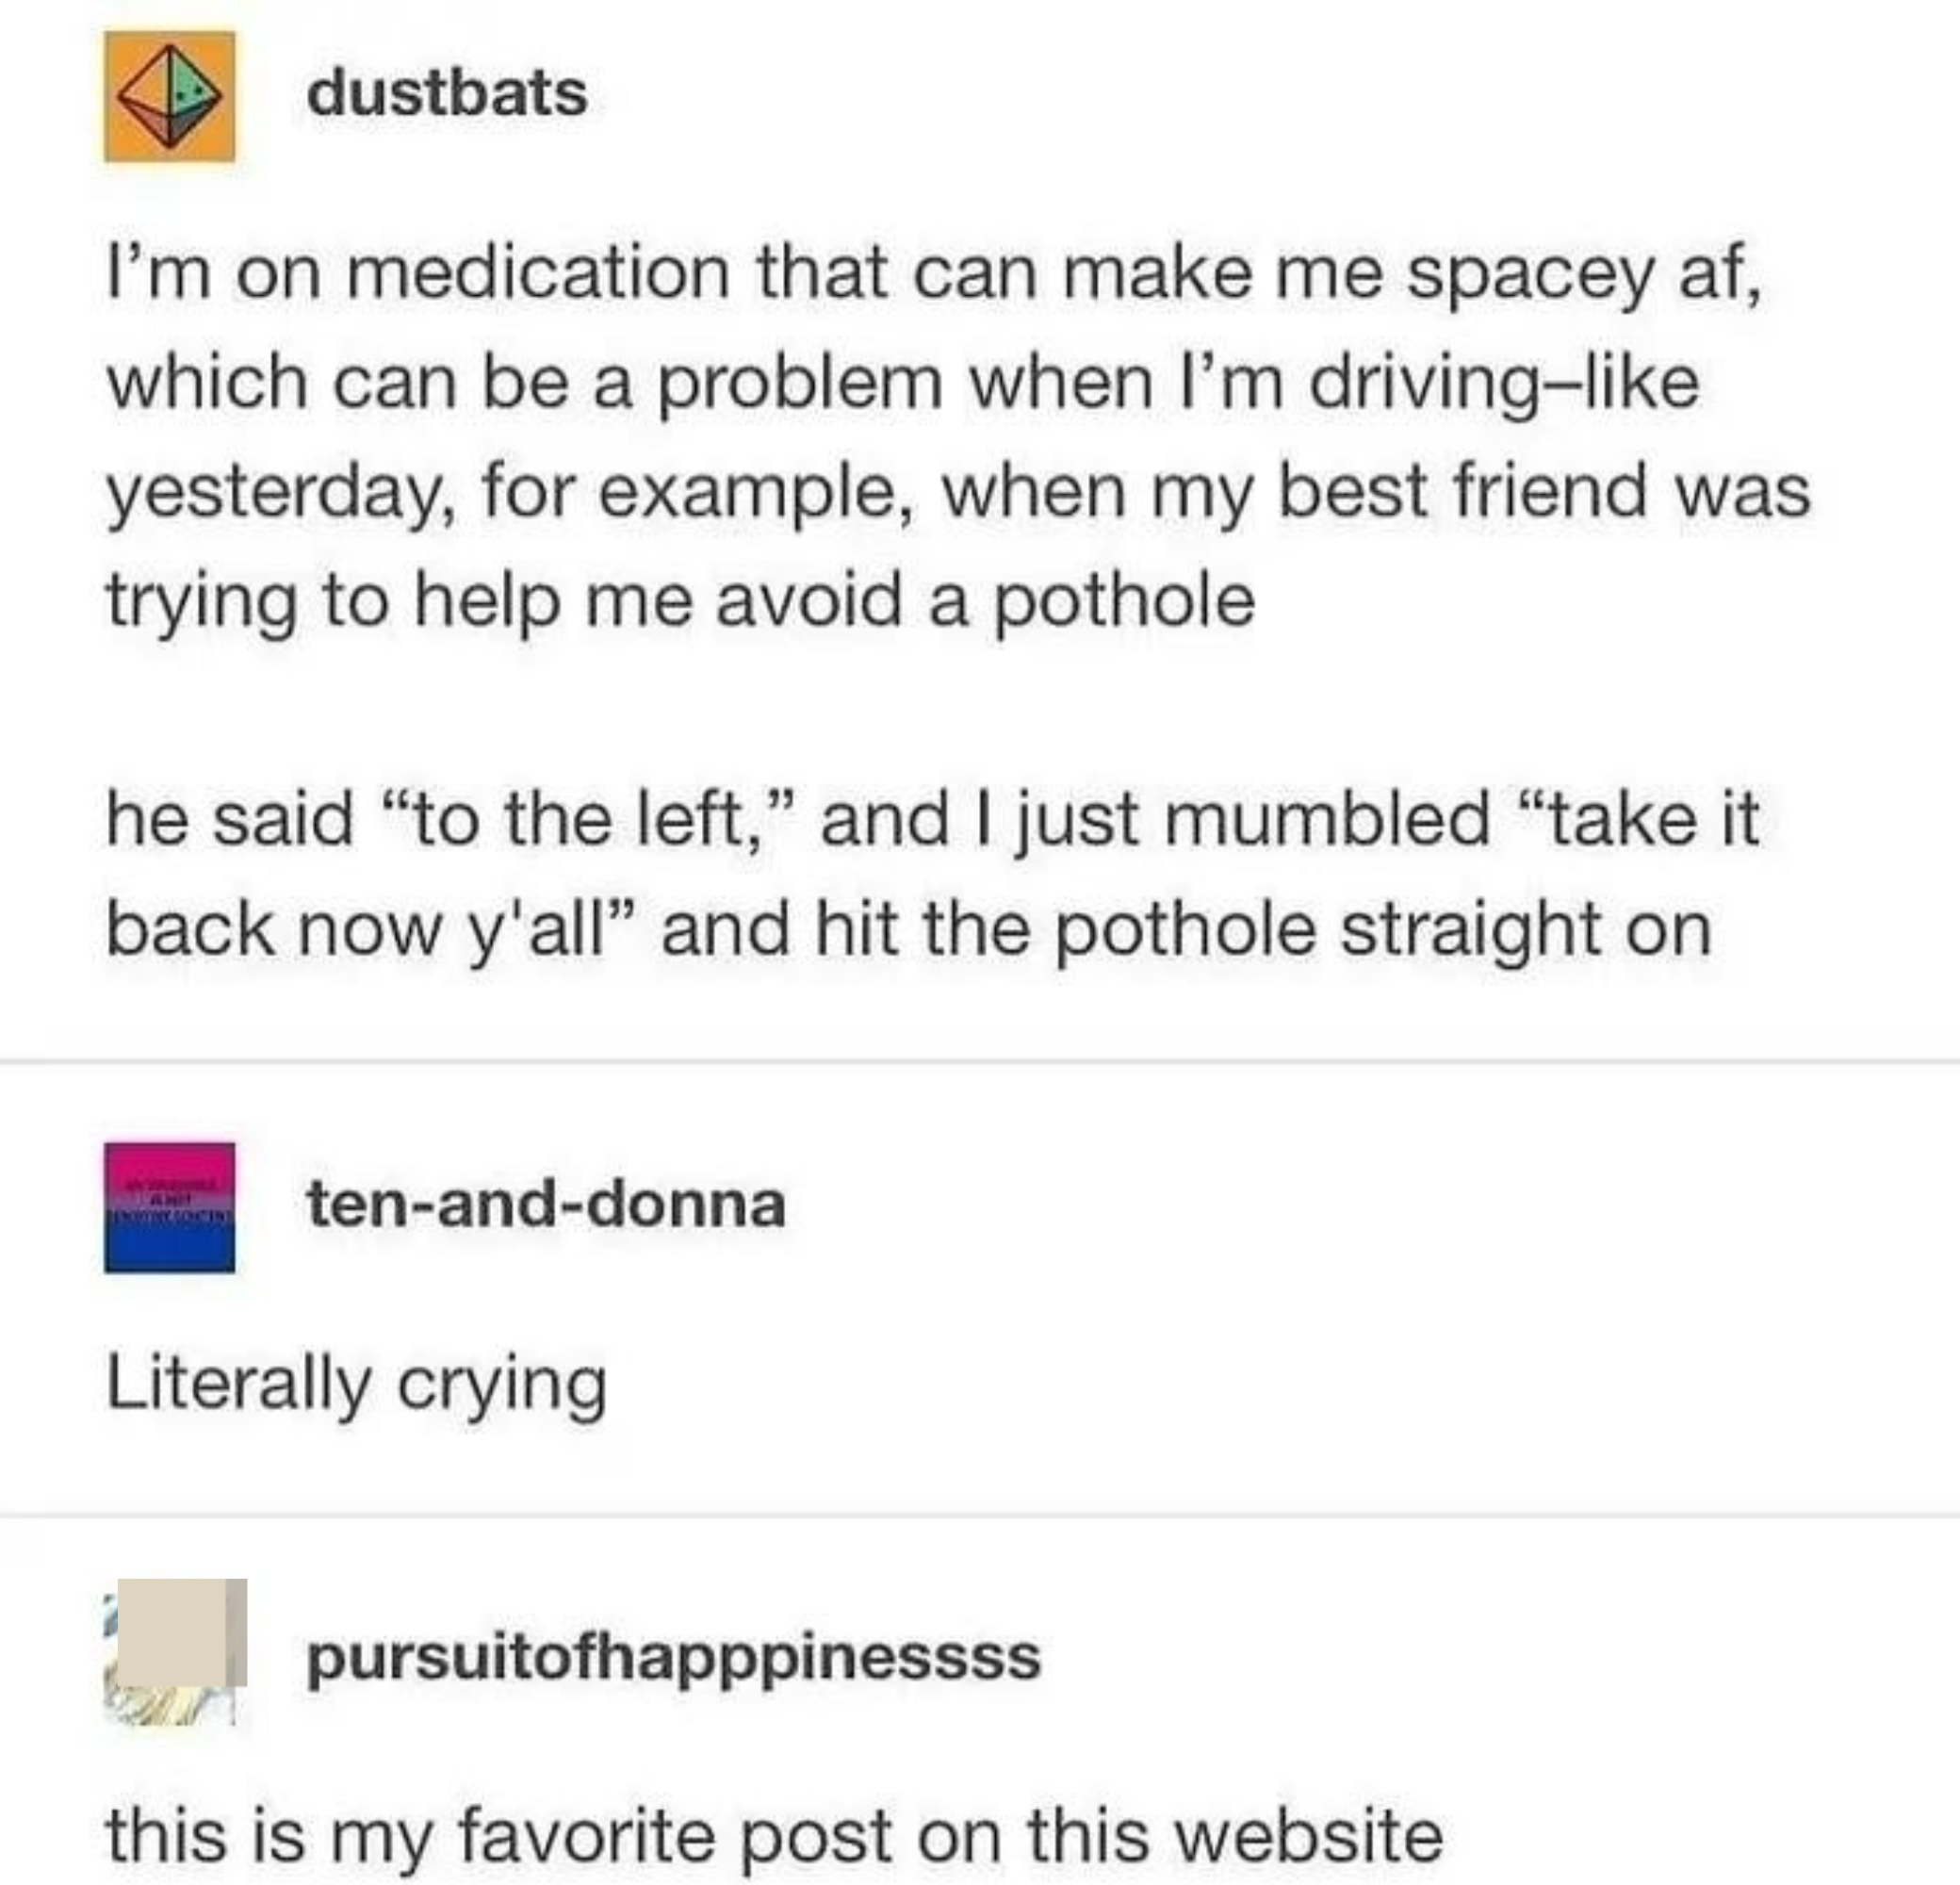 &quot;I&#x27;m on medication that can make me spacey af, which can be a problem when I&#x27;m driving: my friend was trying to help me avoid a pothole; he said &#x27;to the left,&#x27; and I mumbled &#x27;take it back now y&#x27;all&#x27; and hit the pothole straight on,&quot; &quot;Literally crying&quot;